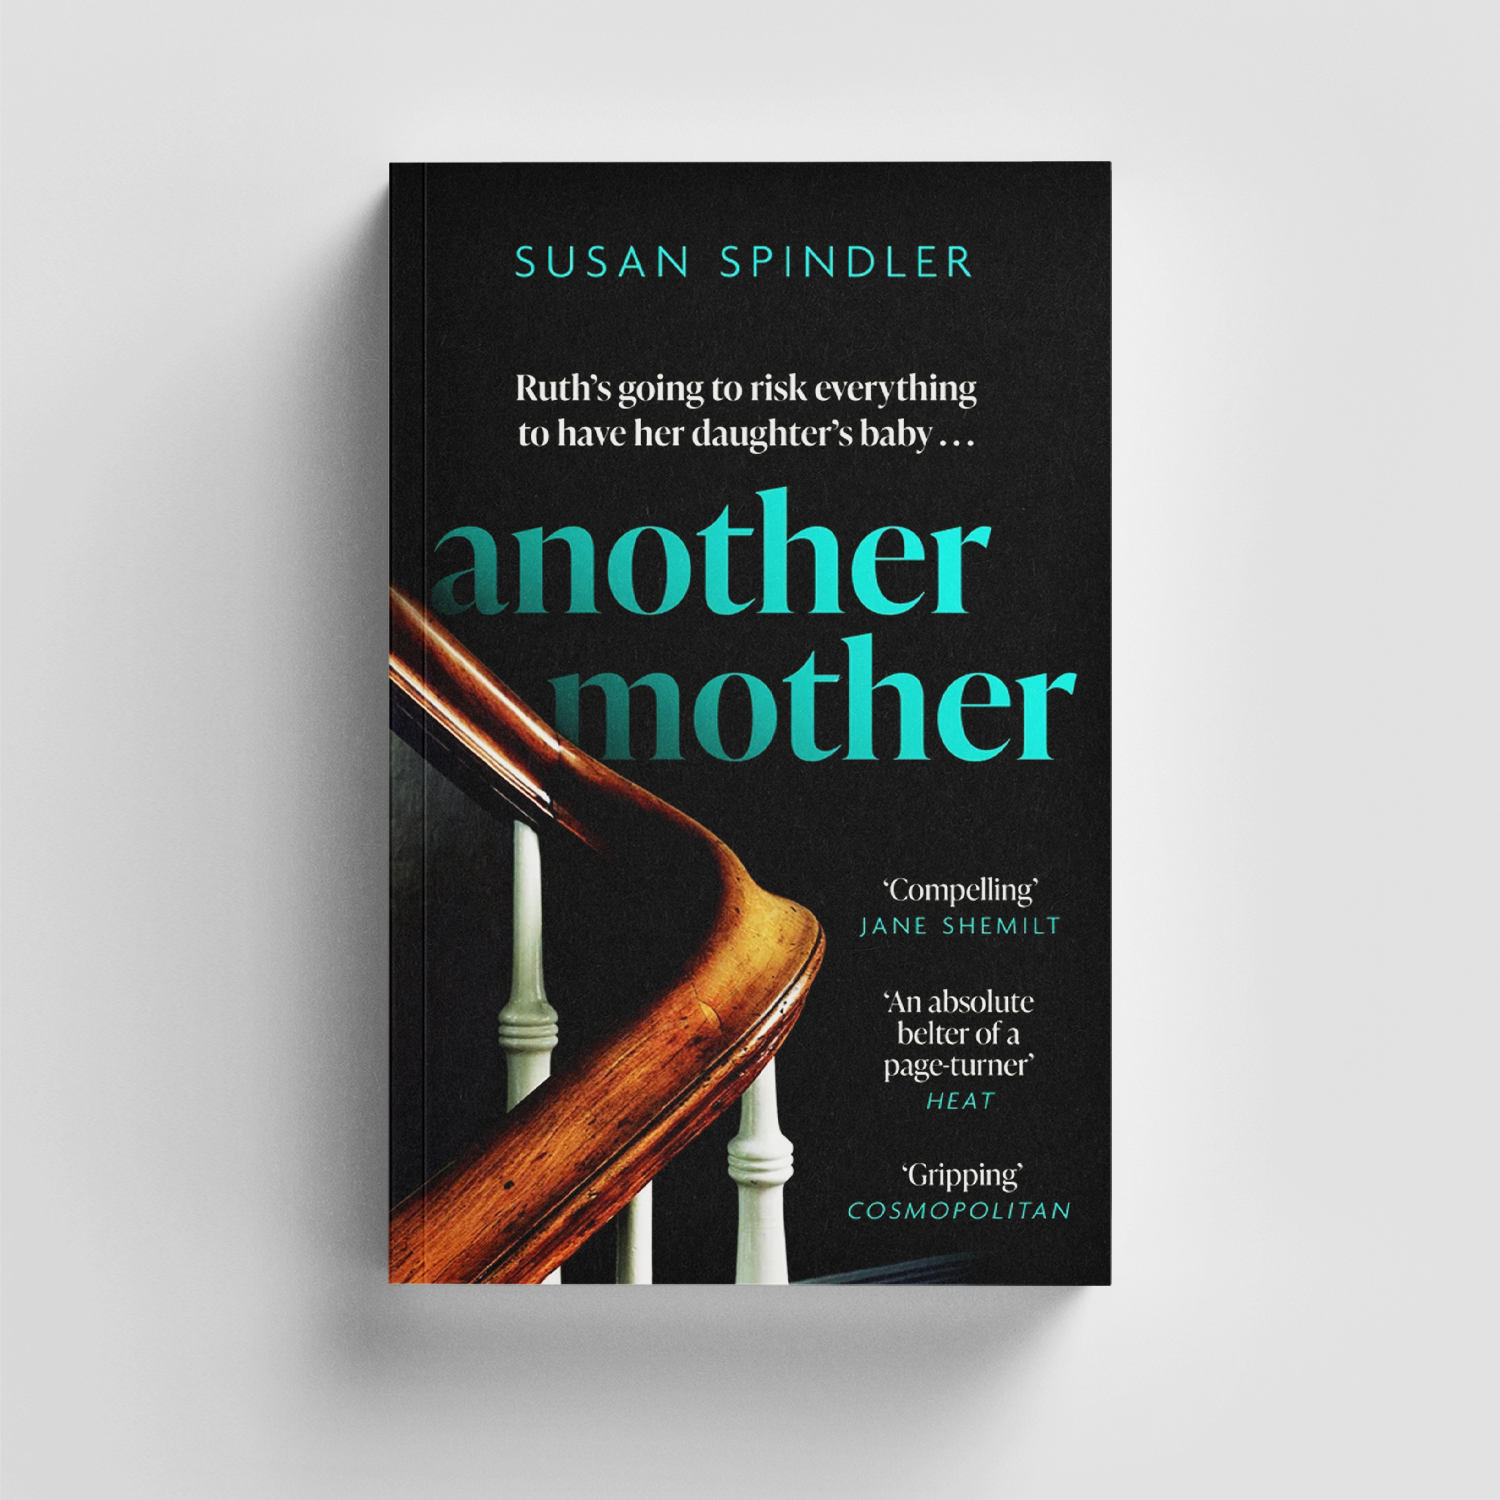 Another Mother by Susan Spindler